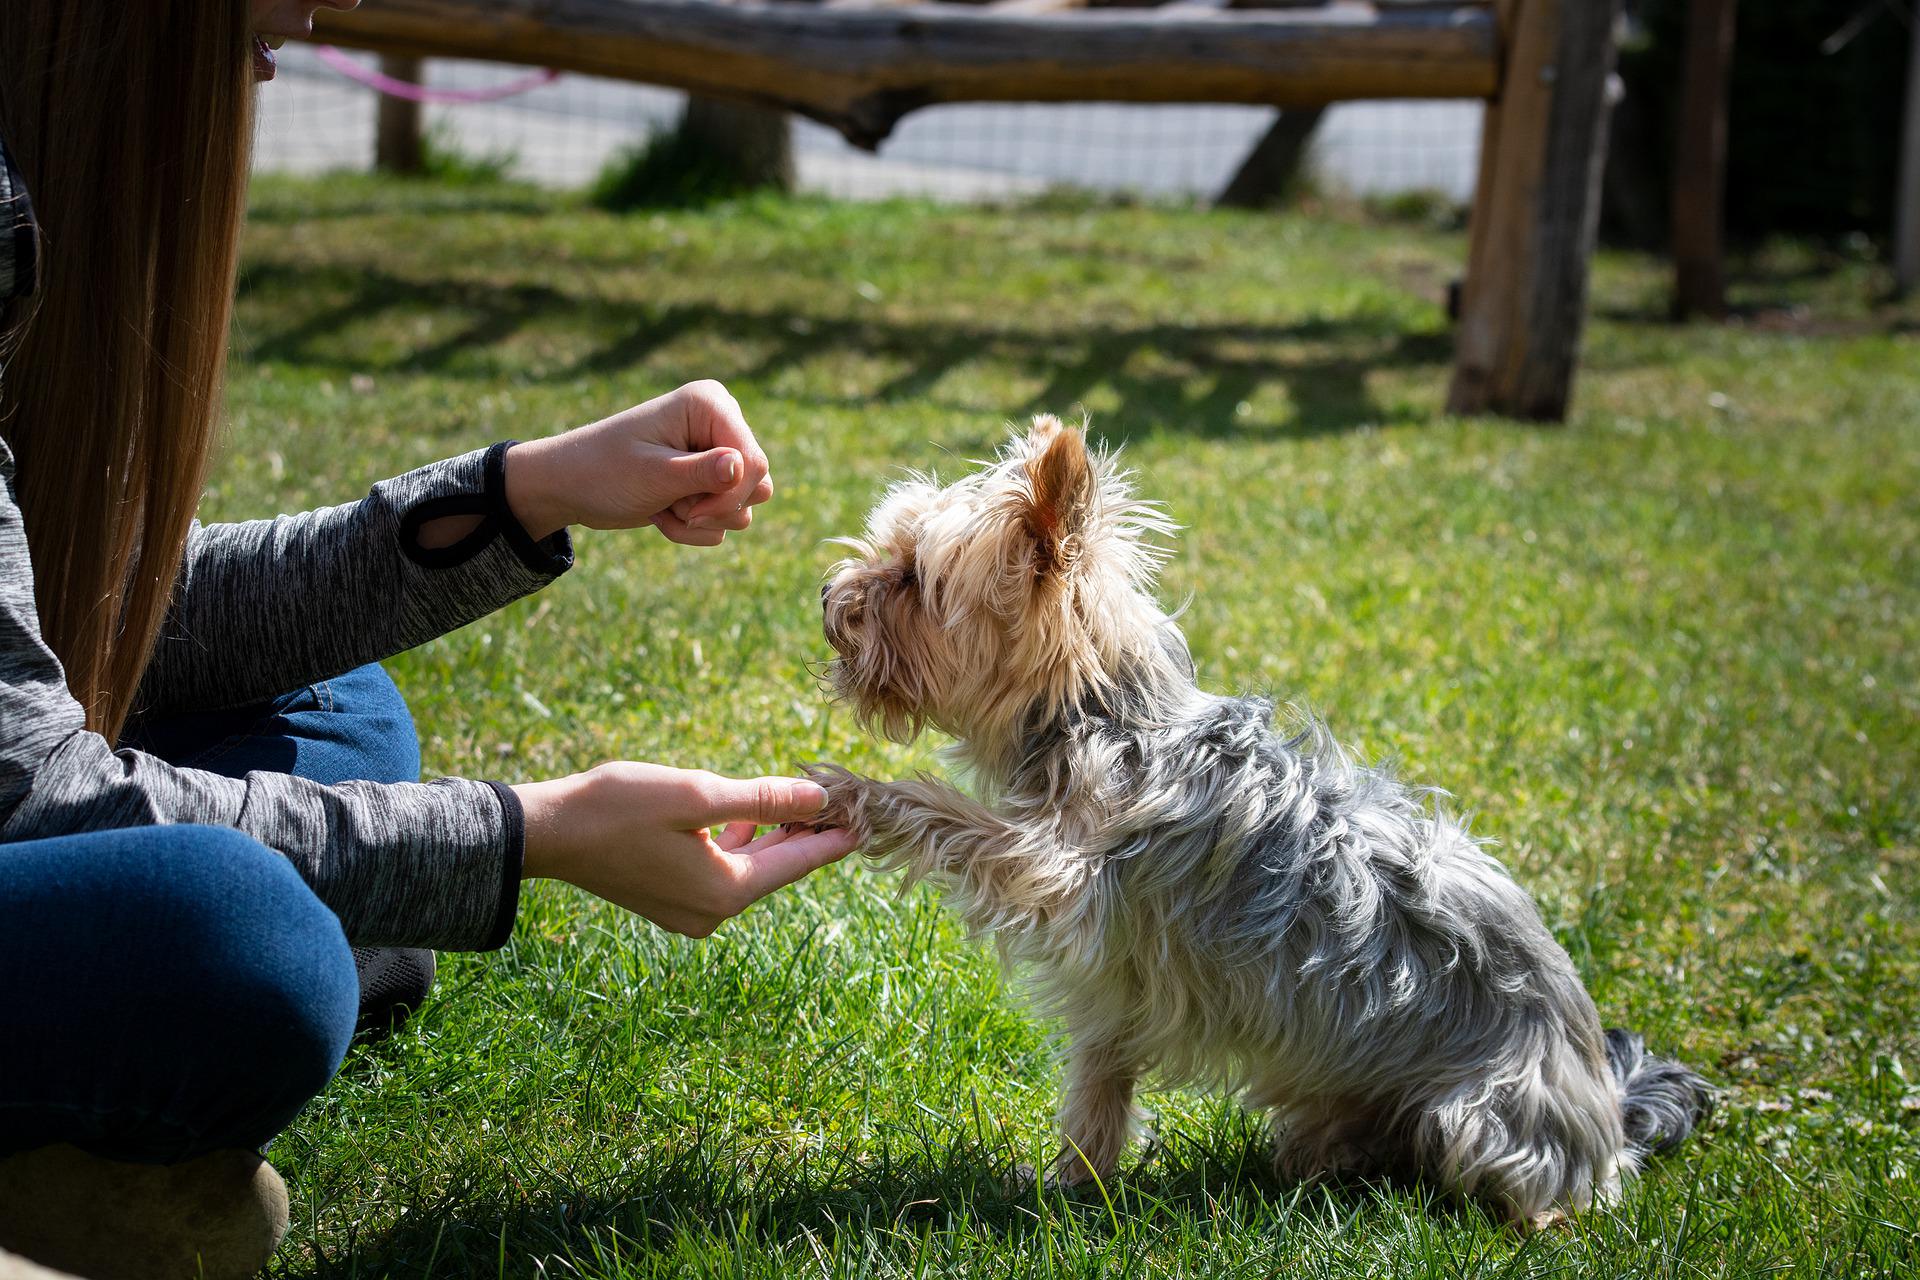 Dog Training For Beginners: All The Tips You Need